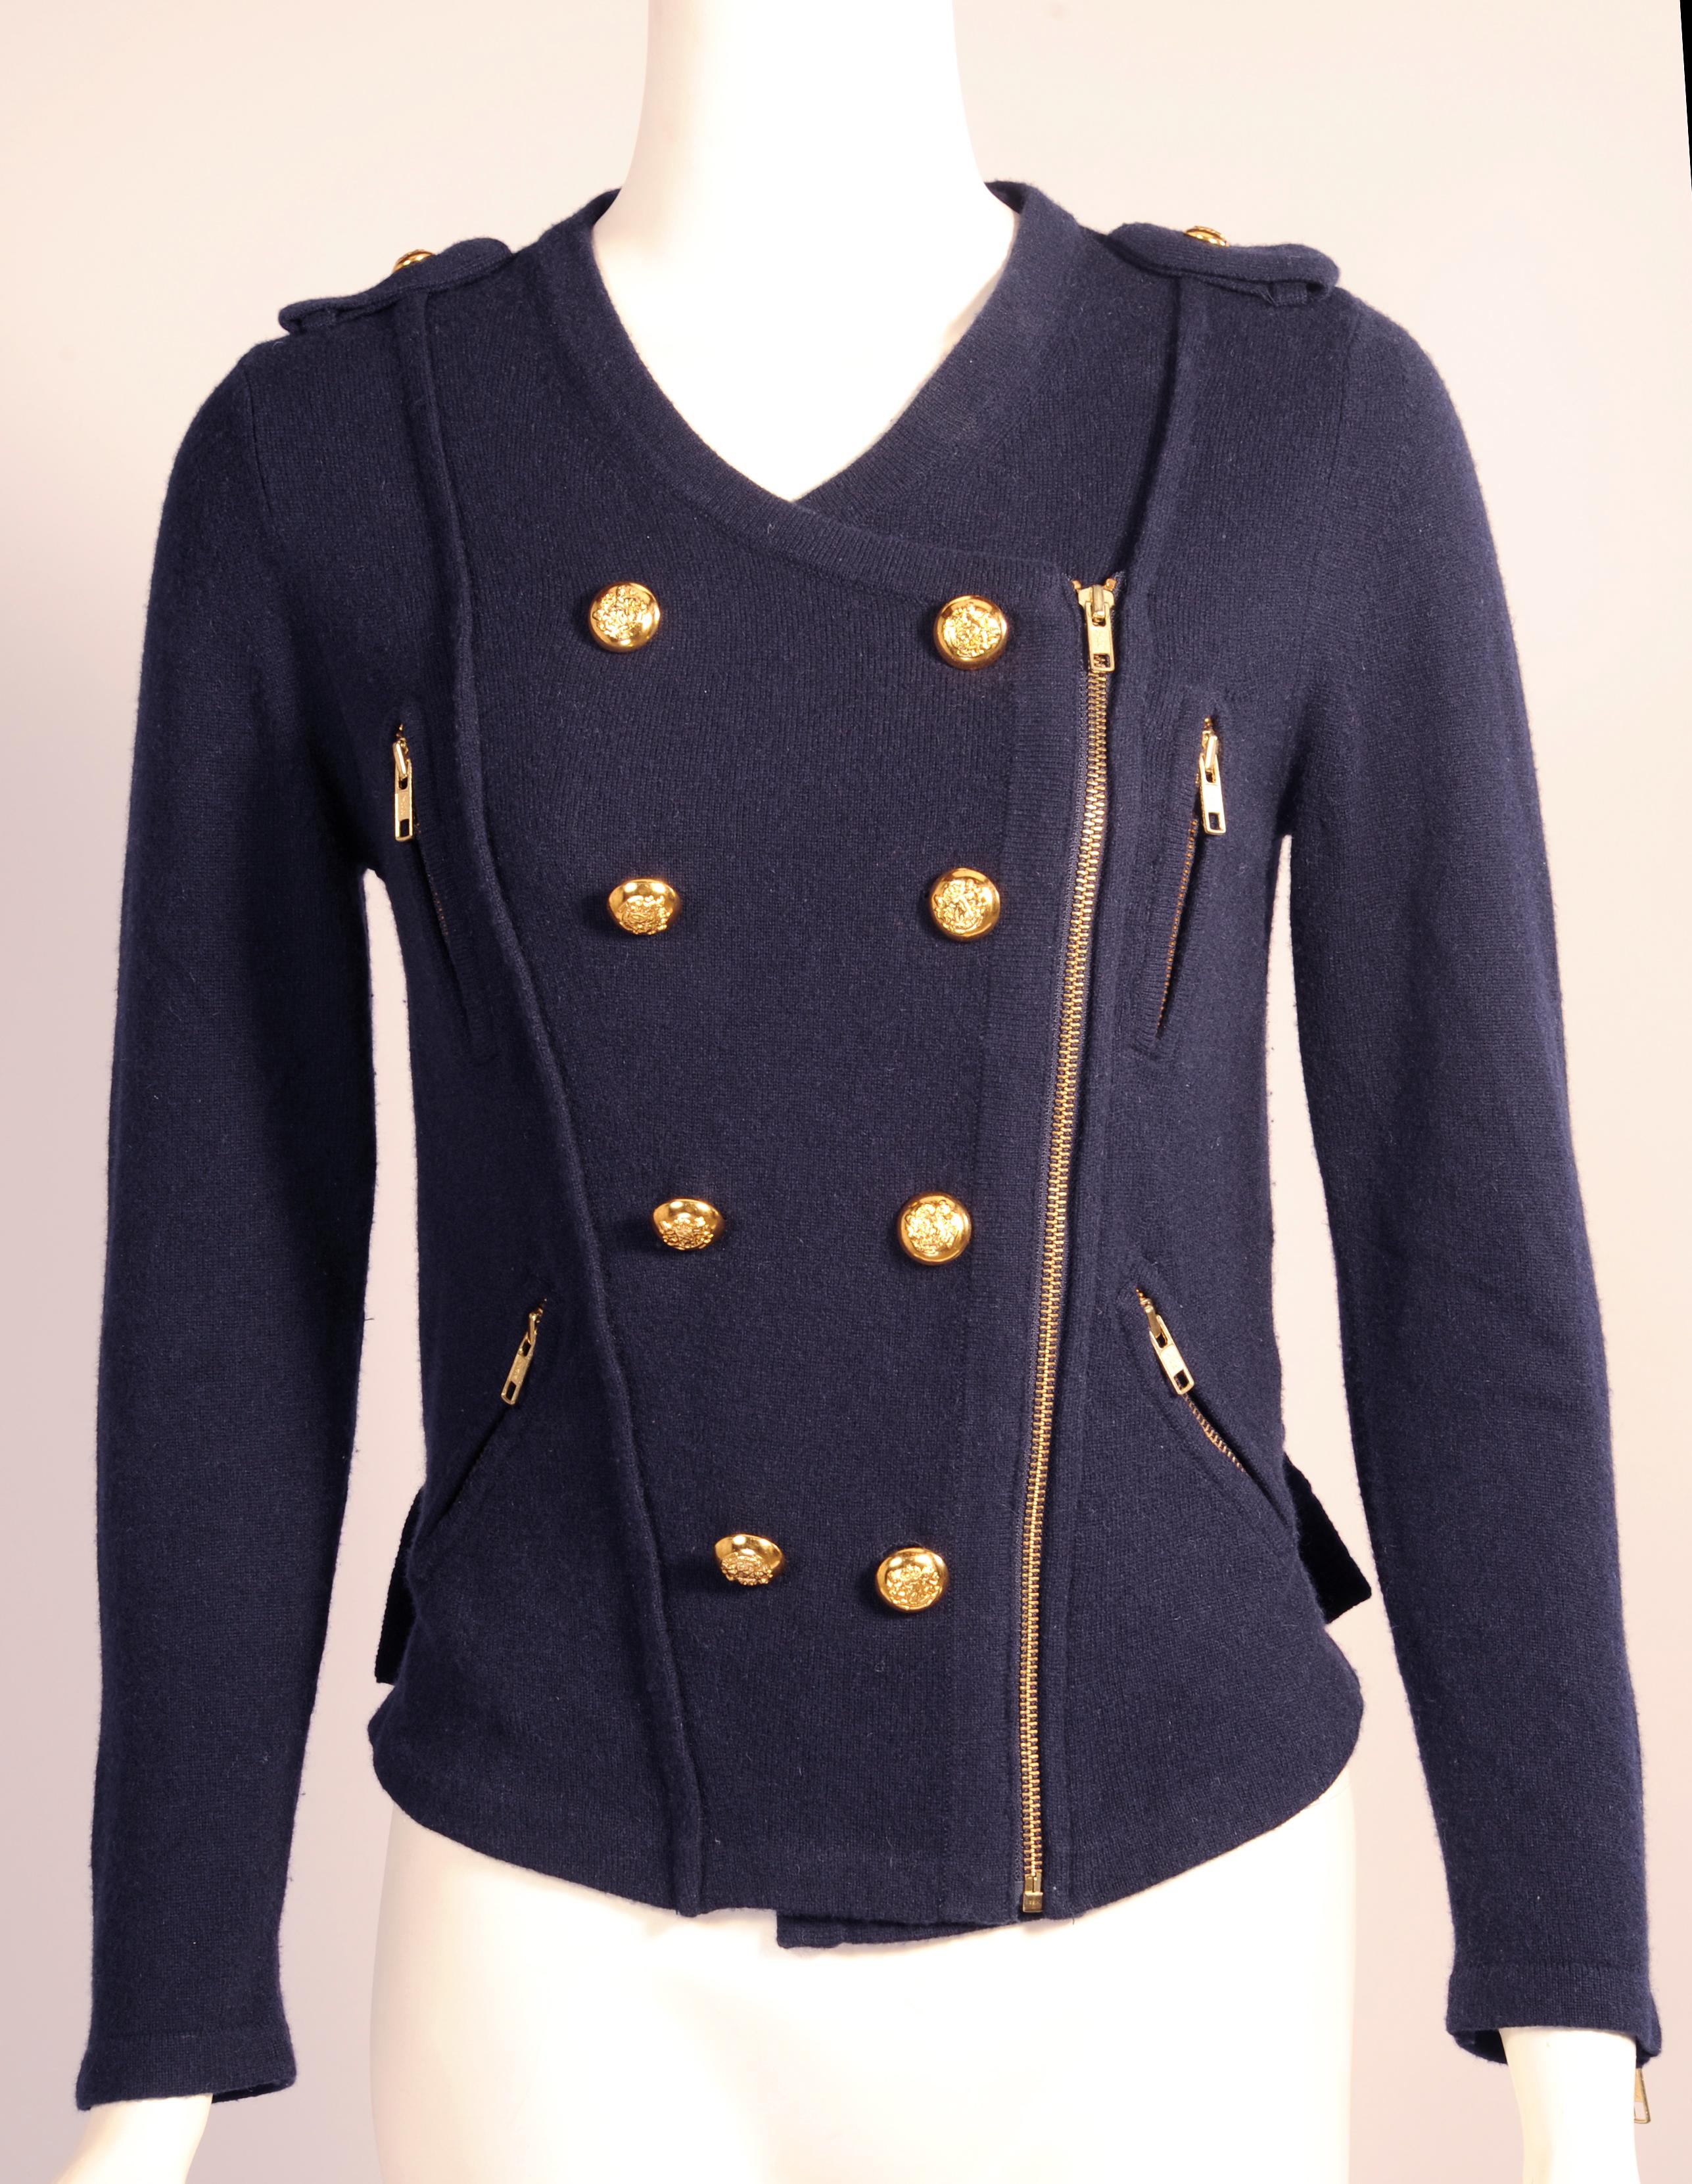 Military inspiration is on display in this double breasted sweater with gold toned buttons and epaulets. The sweater also has a left side zipper, four zipper pockets, zippers on both sleeves, and two buckles on the back to adjust the fit of the